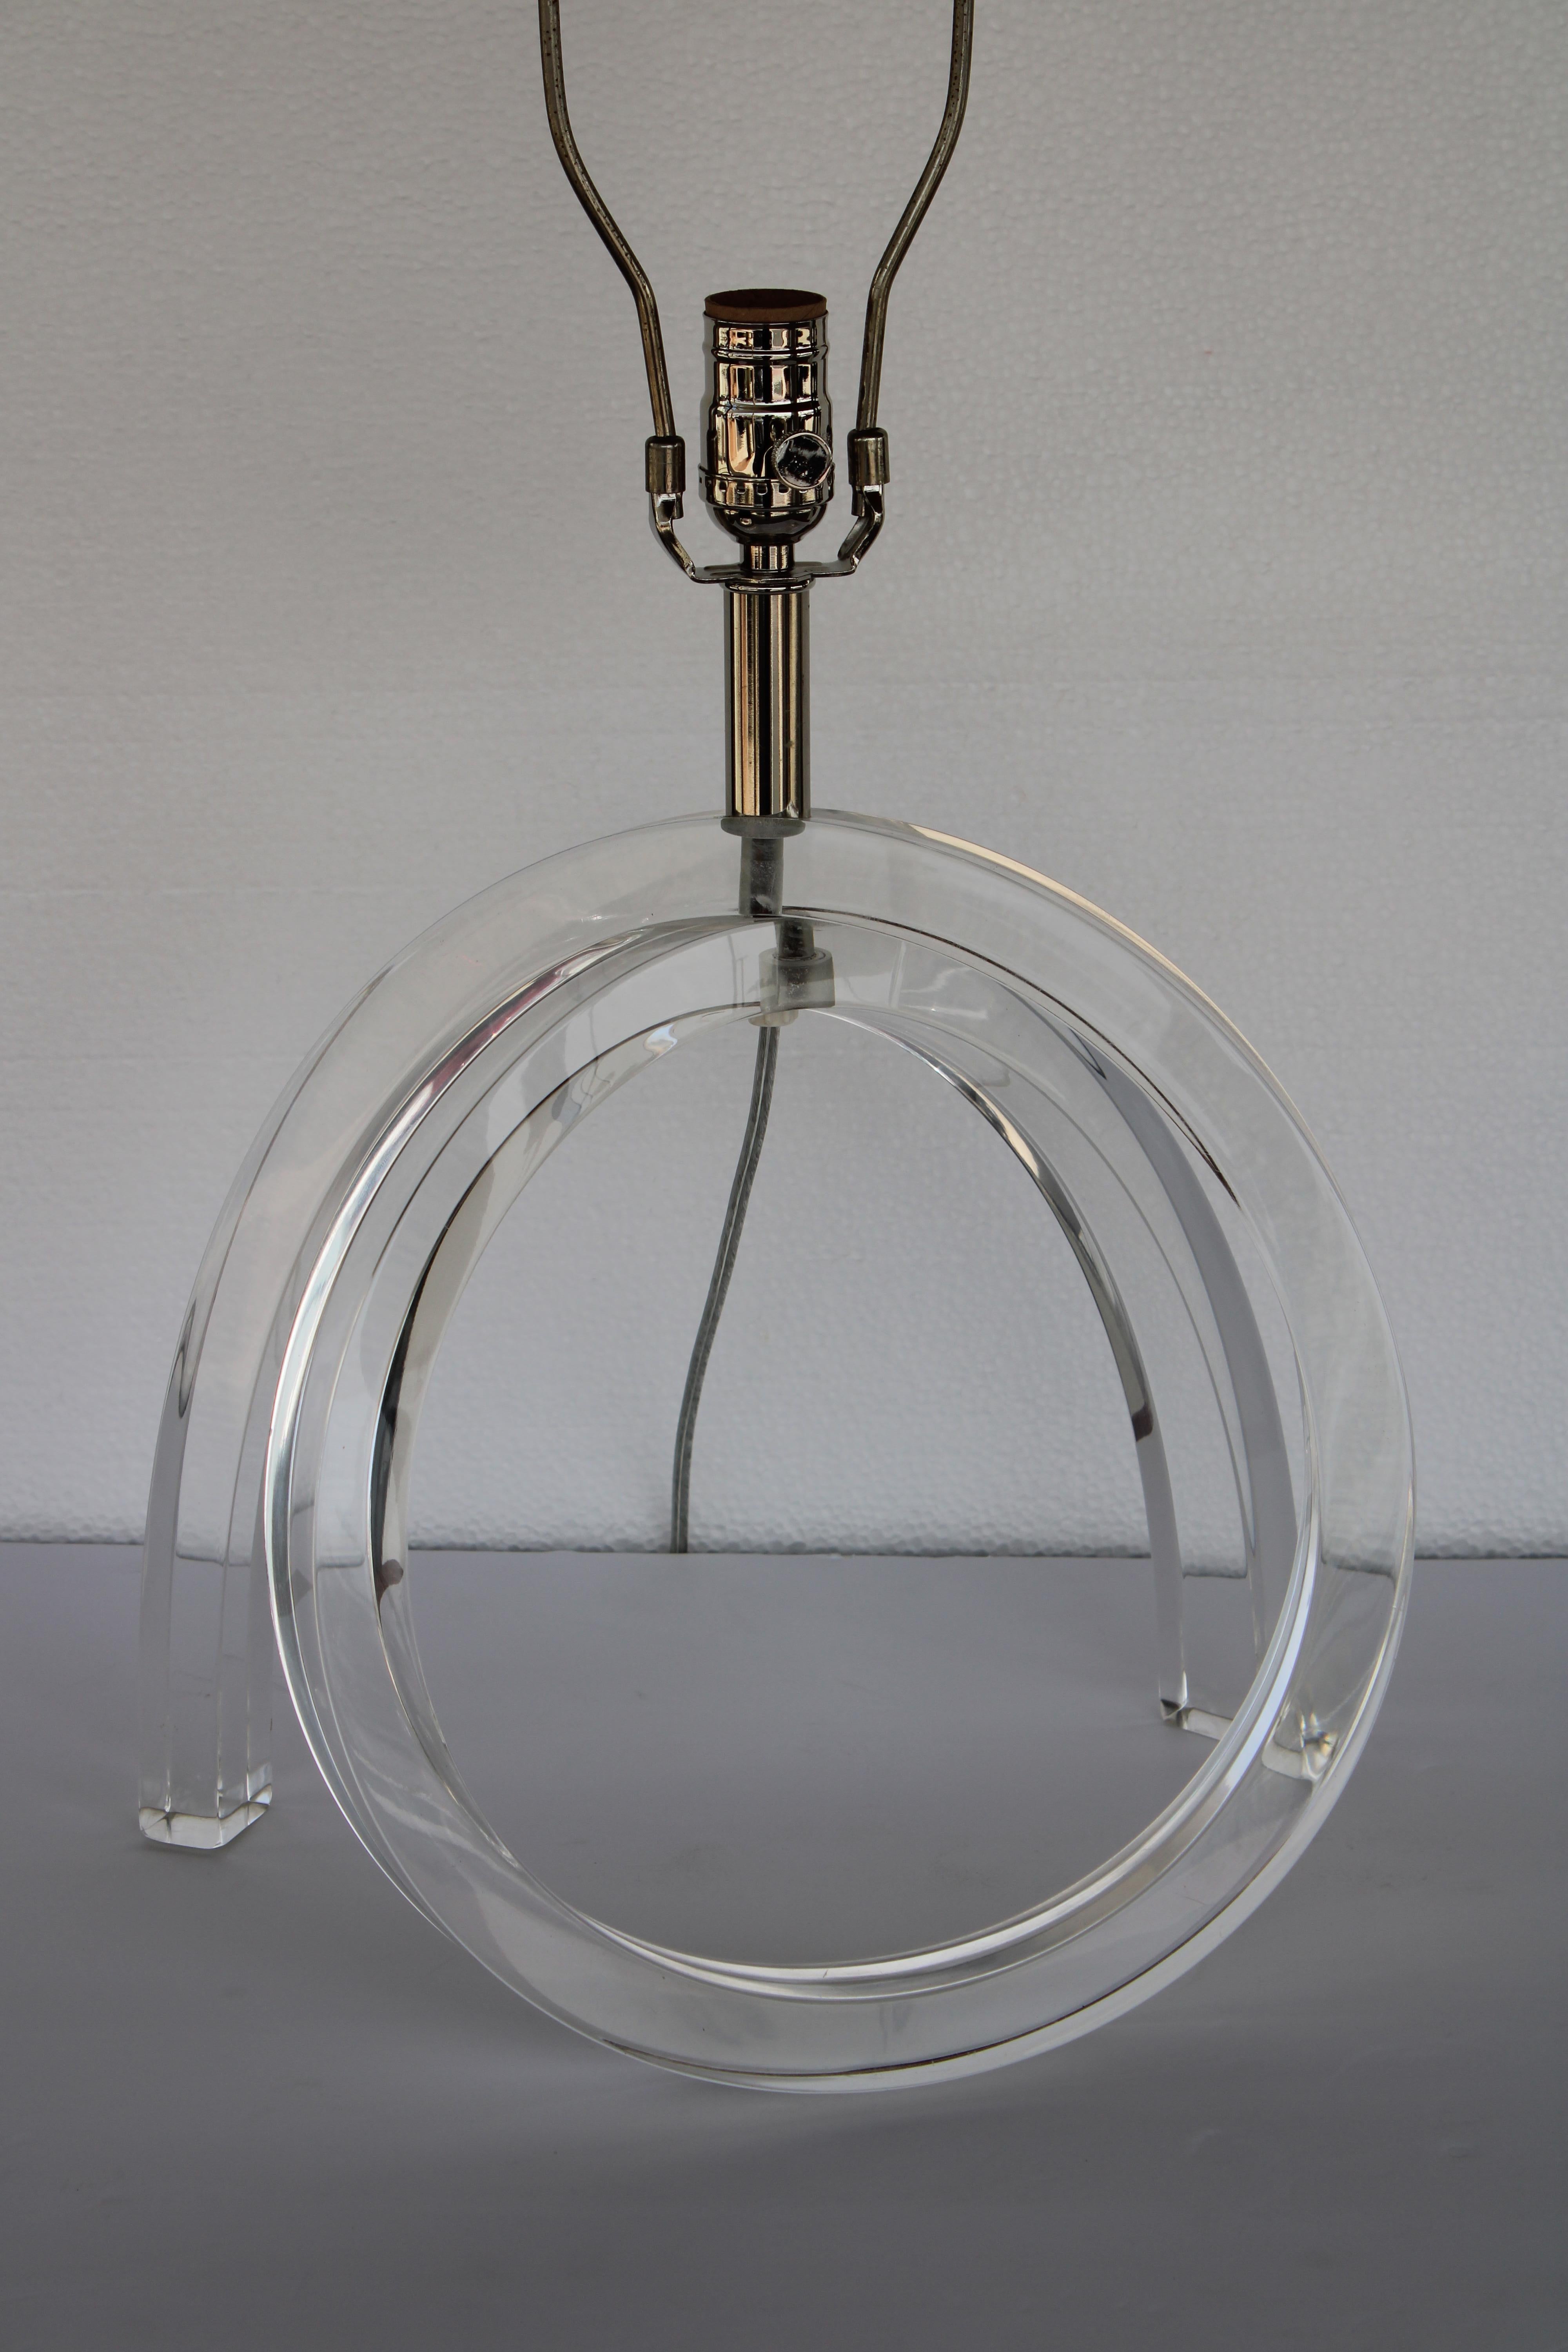 Mid-Century Modern Lucite Lamp Attributed to Astrolite for the Ritts Company, Los Angeles, CA For Sale